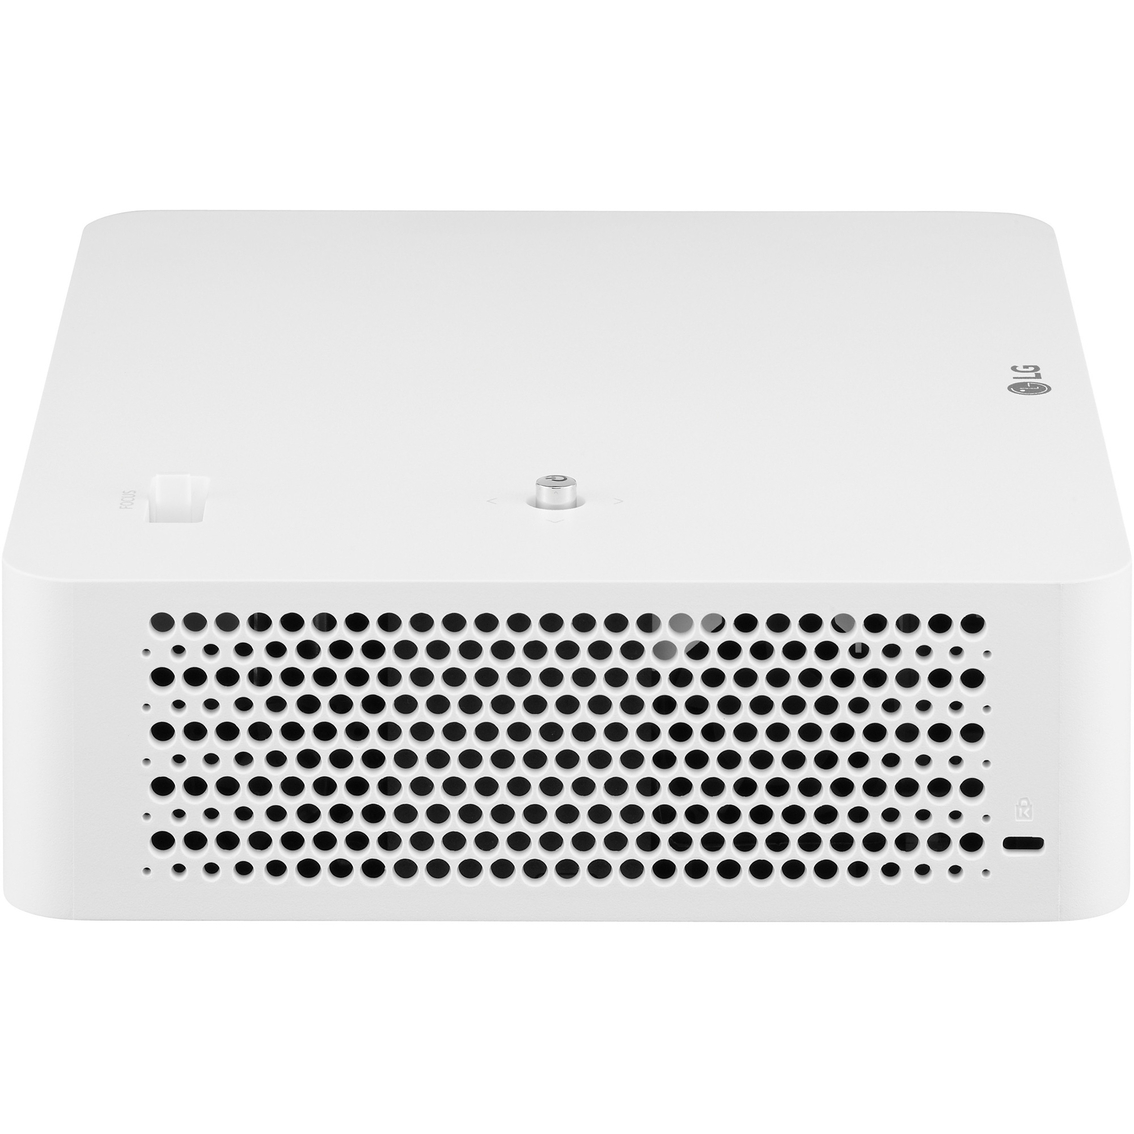 LG PF610P Full HD LED Portable Smart Projector - Image 4 of 10